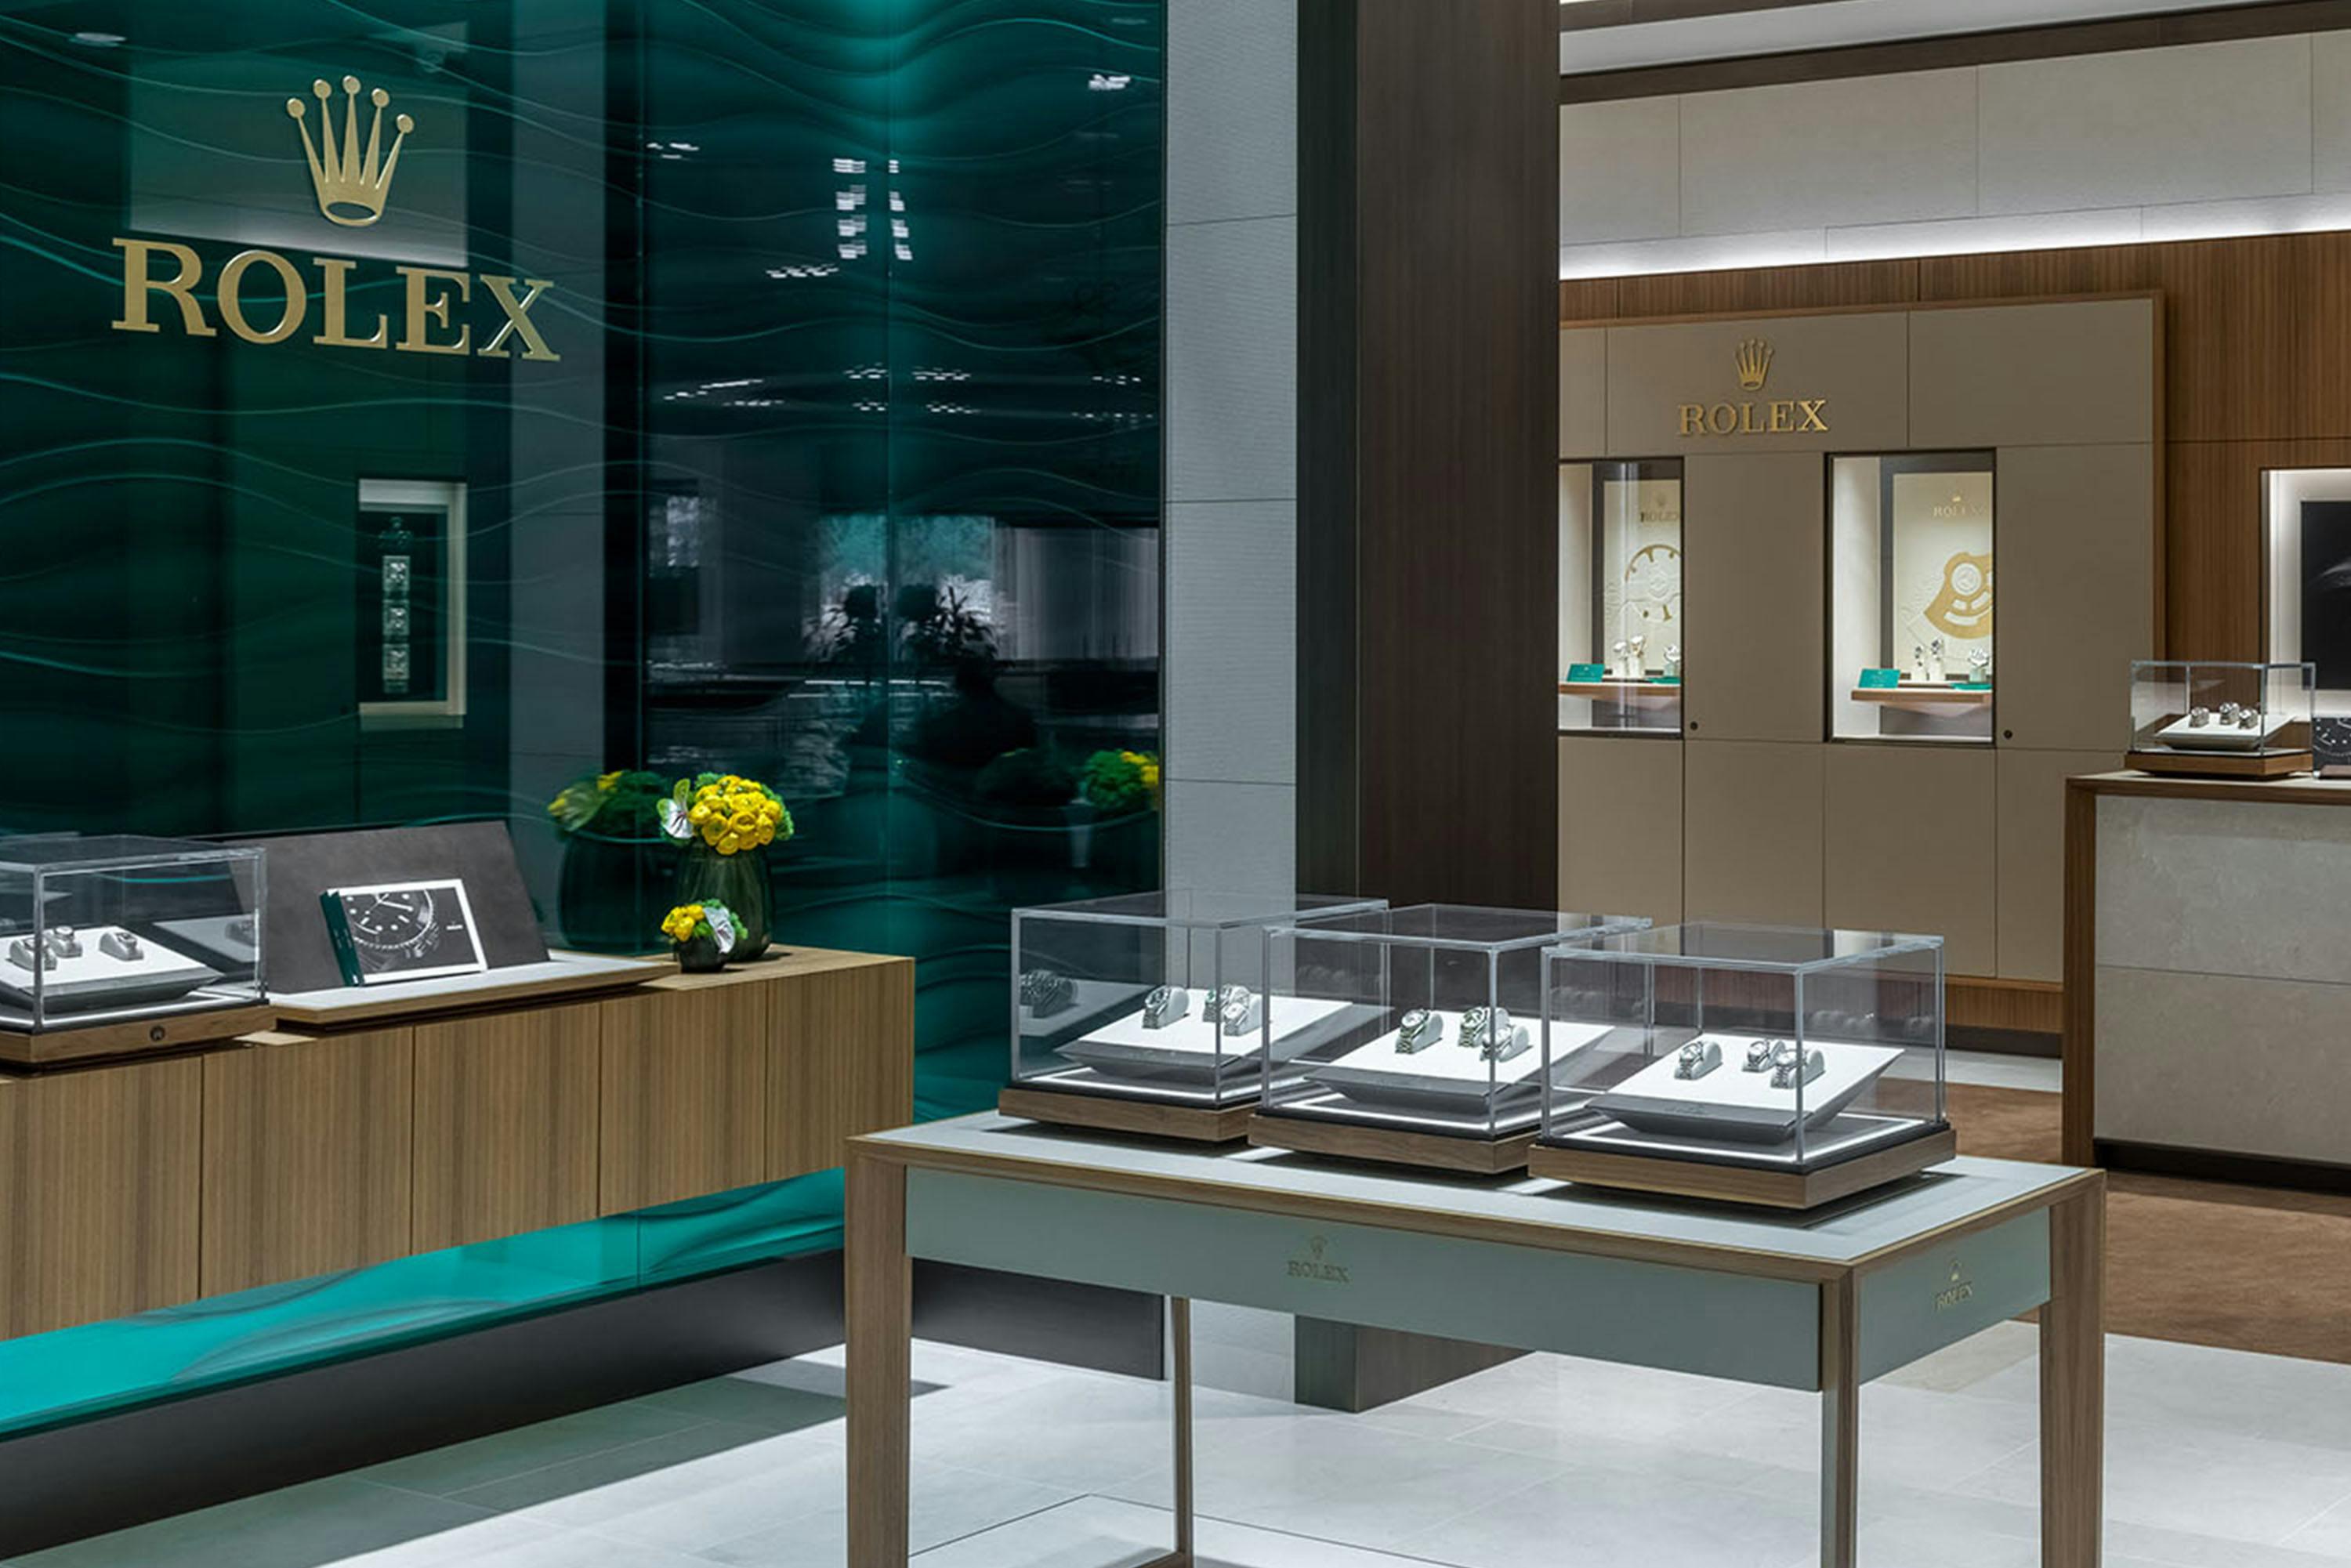 Interior Rolex area at Lee Michaels Fine Jewelry in Baton Rouge